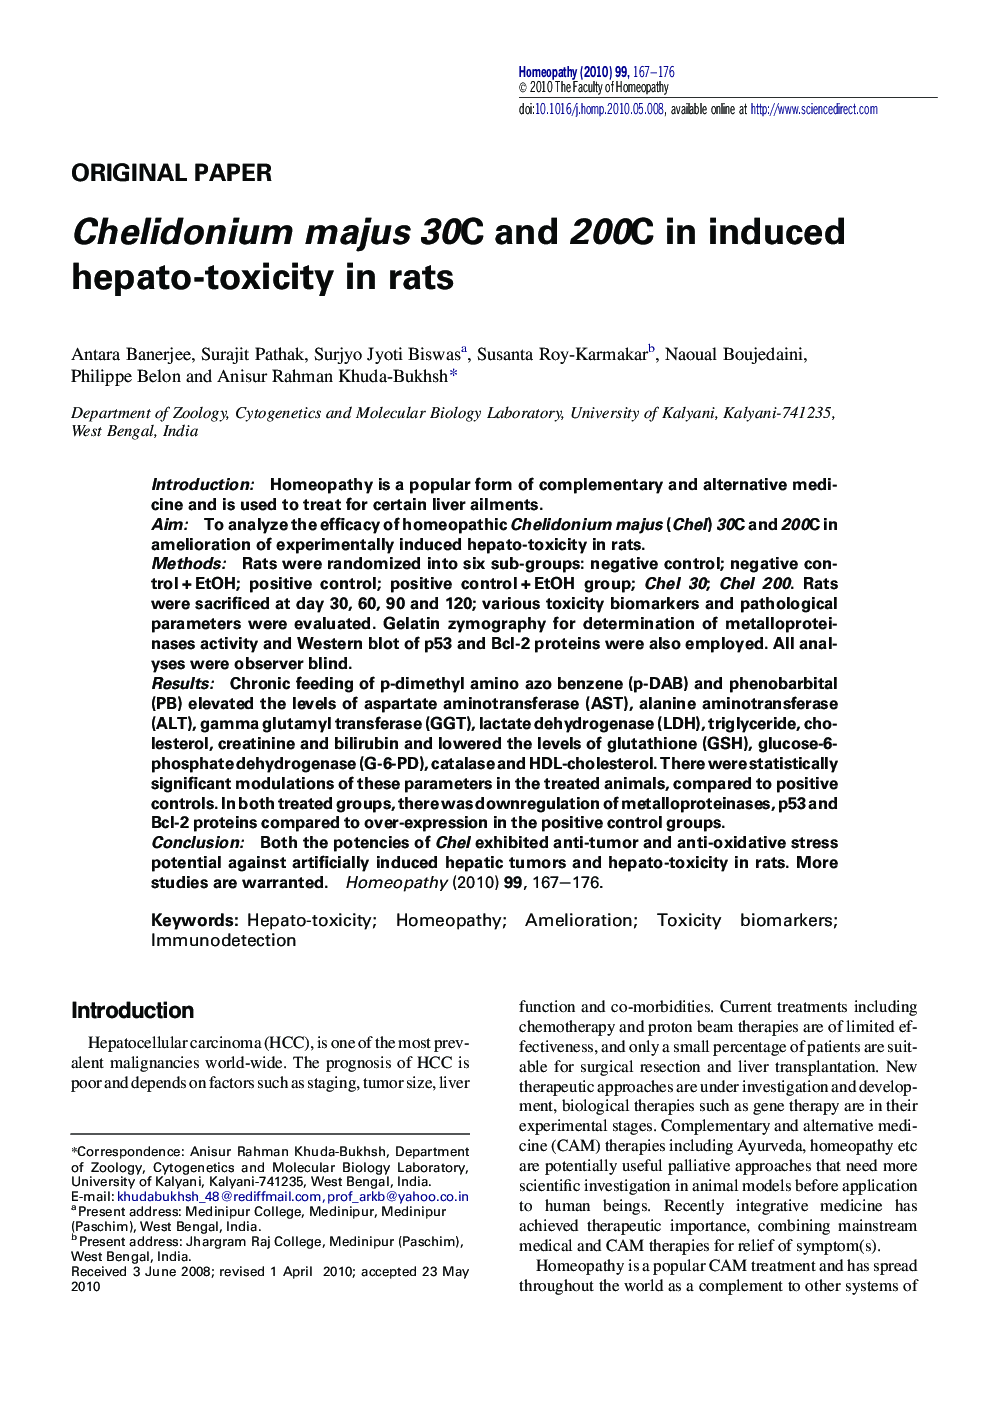 Chelidonium majus 30C and 200C in induced hepato-toxicity in rats